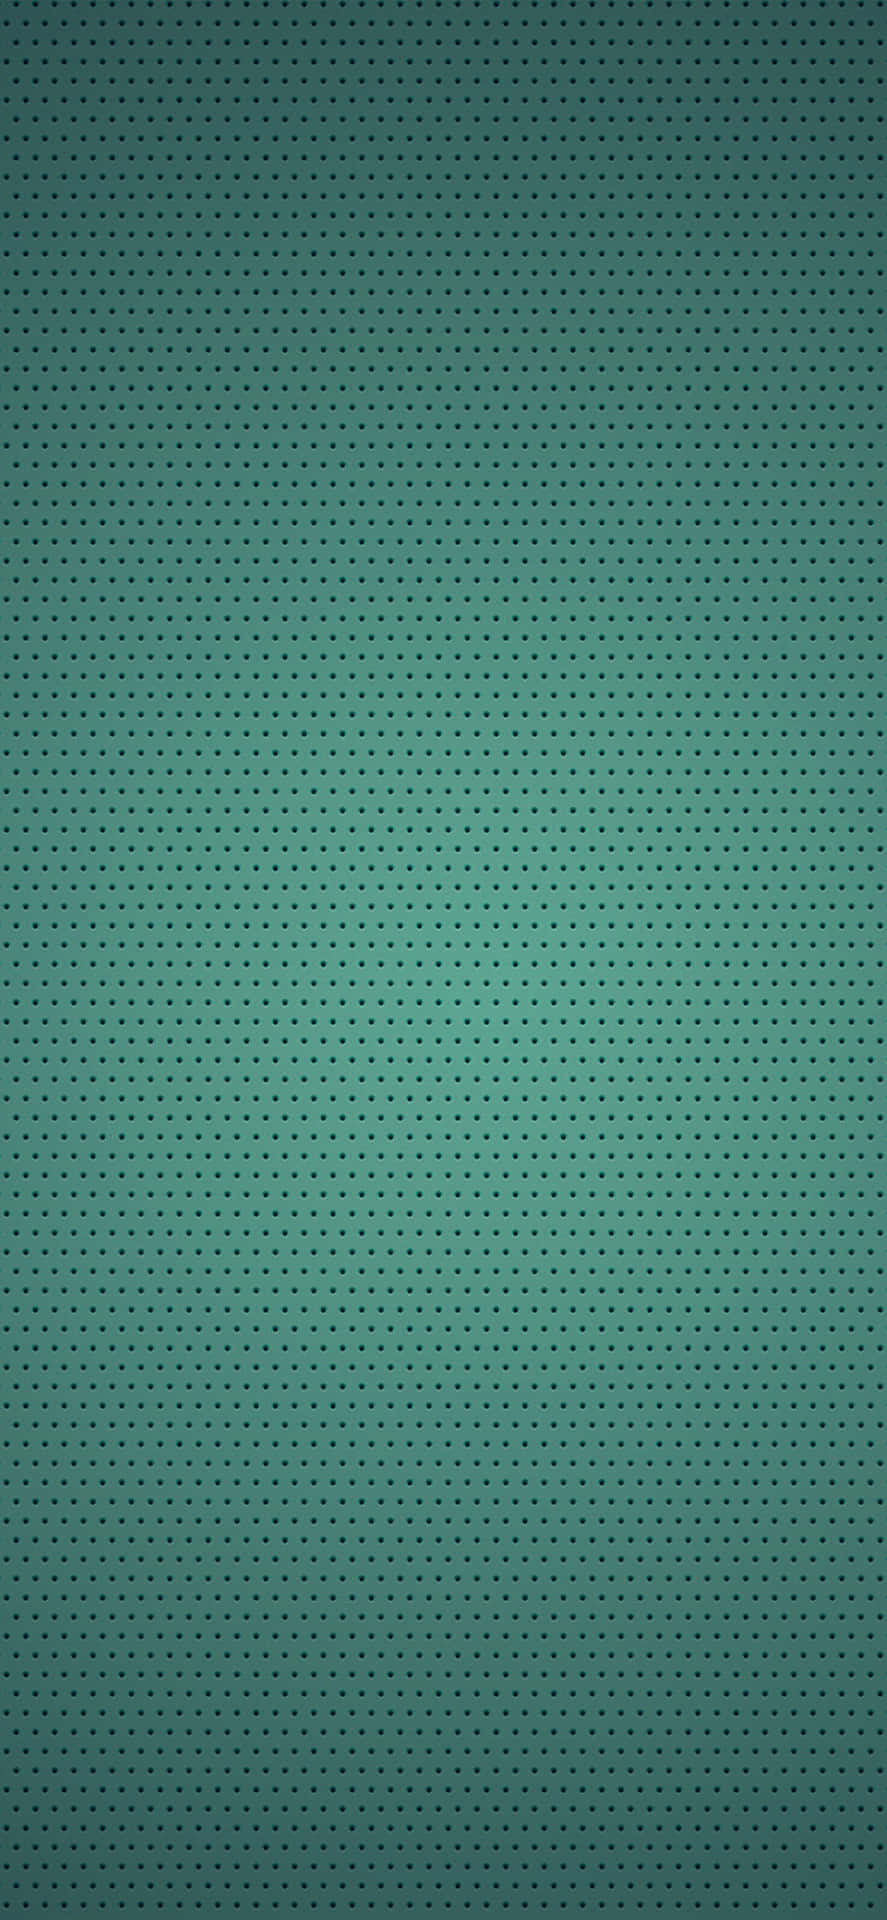 A Green Background With Dots Wallpaper